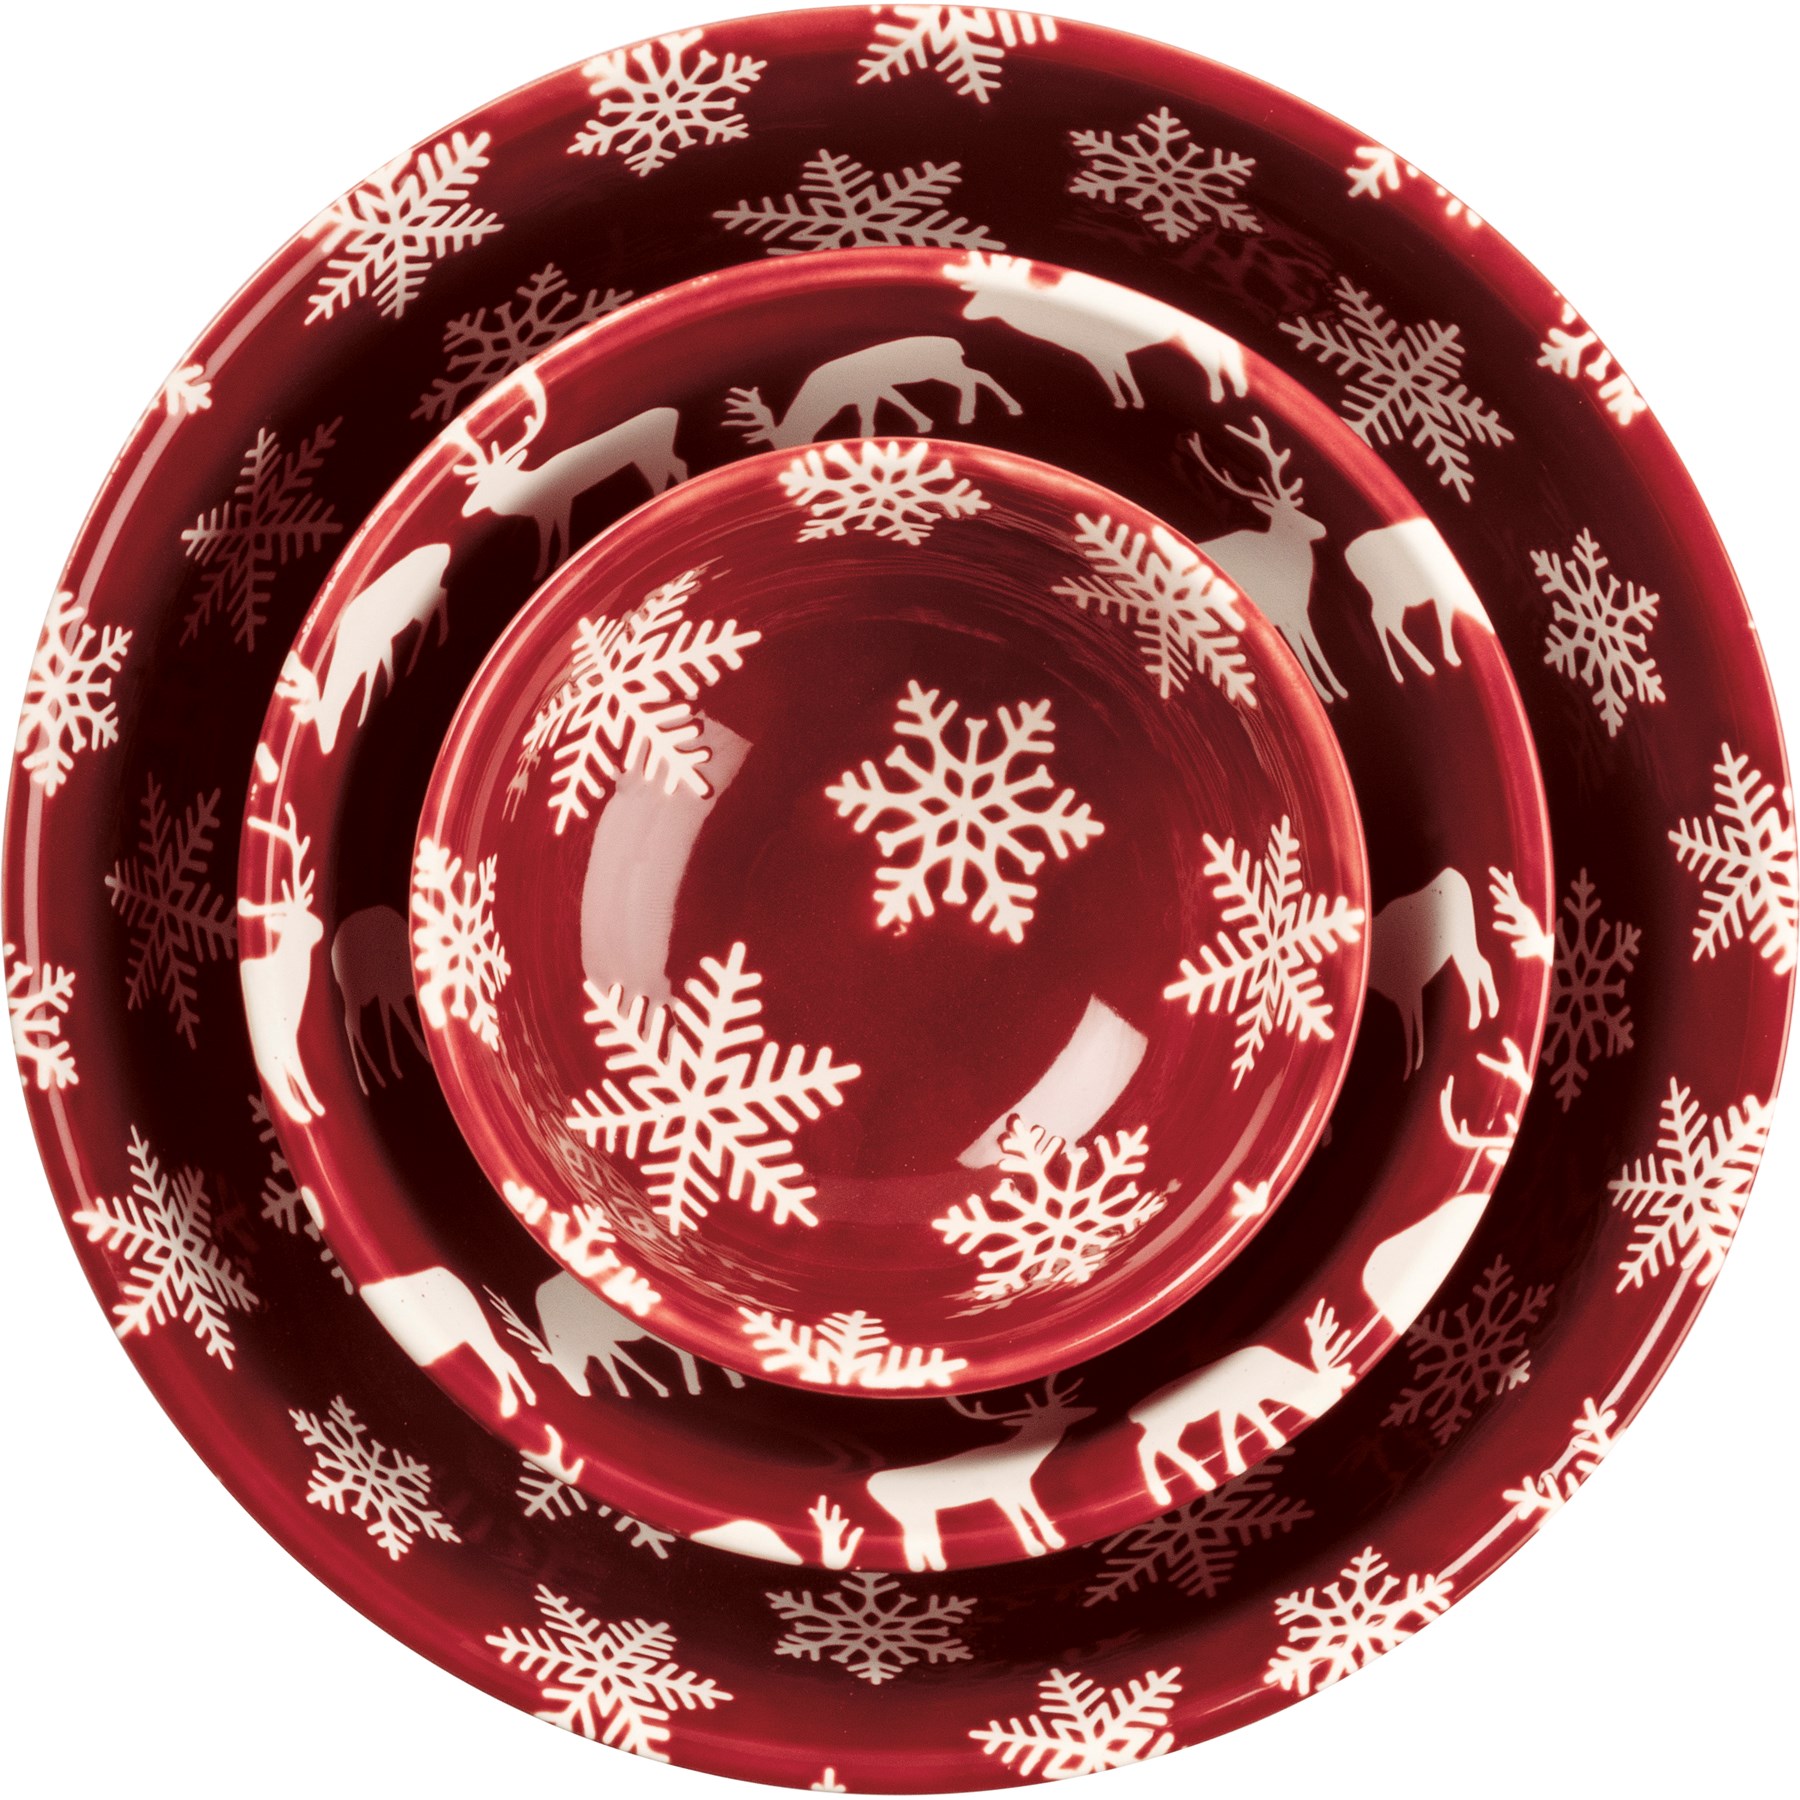 Primitives By Kathy 12 Inches Diameter Stoneware Merry Christmas Giving Accent Plate 36097 